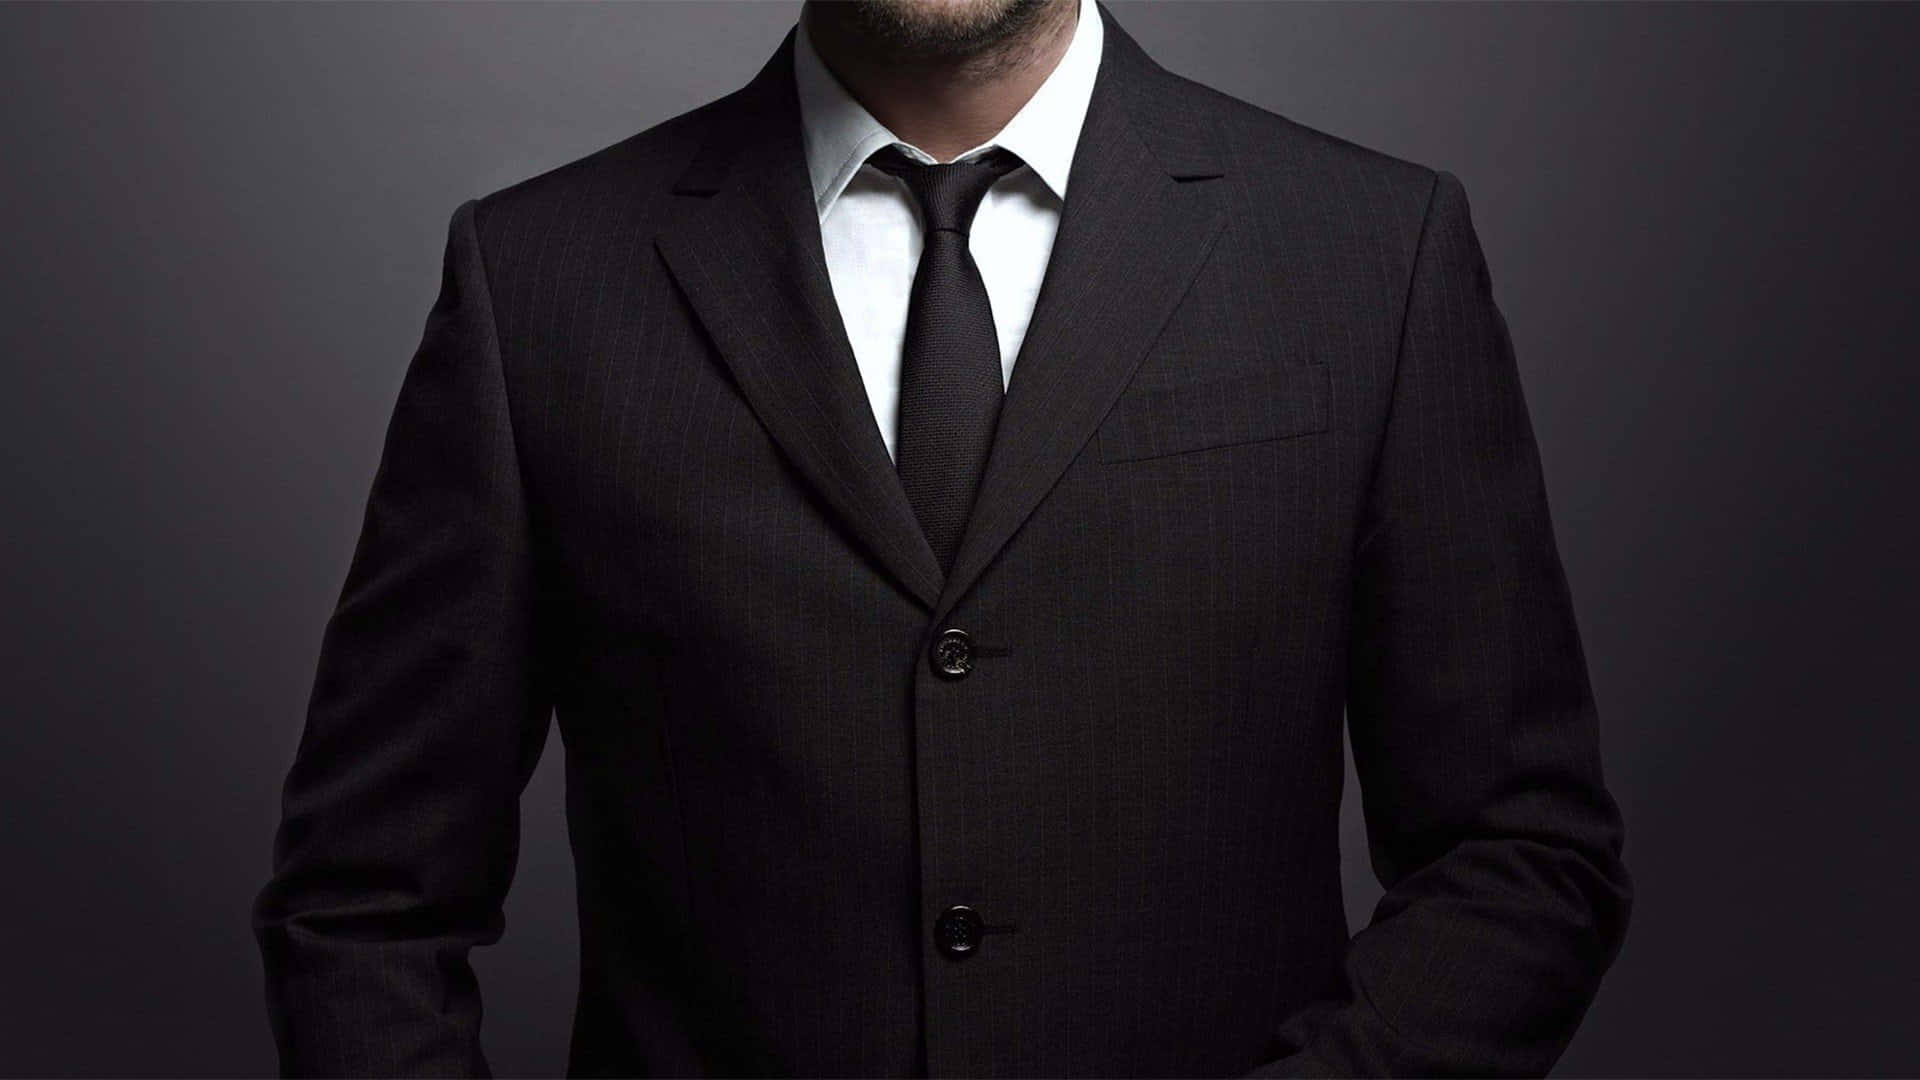 Look sharp with a New Suit